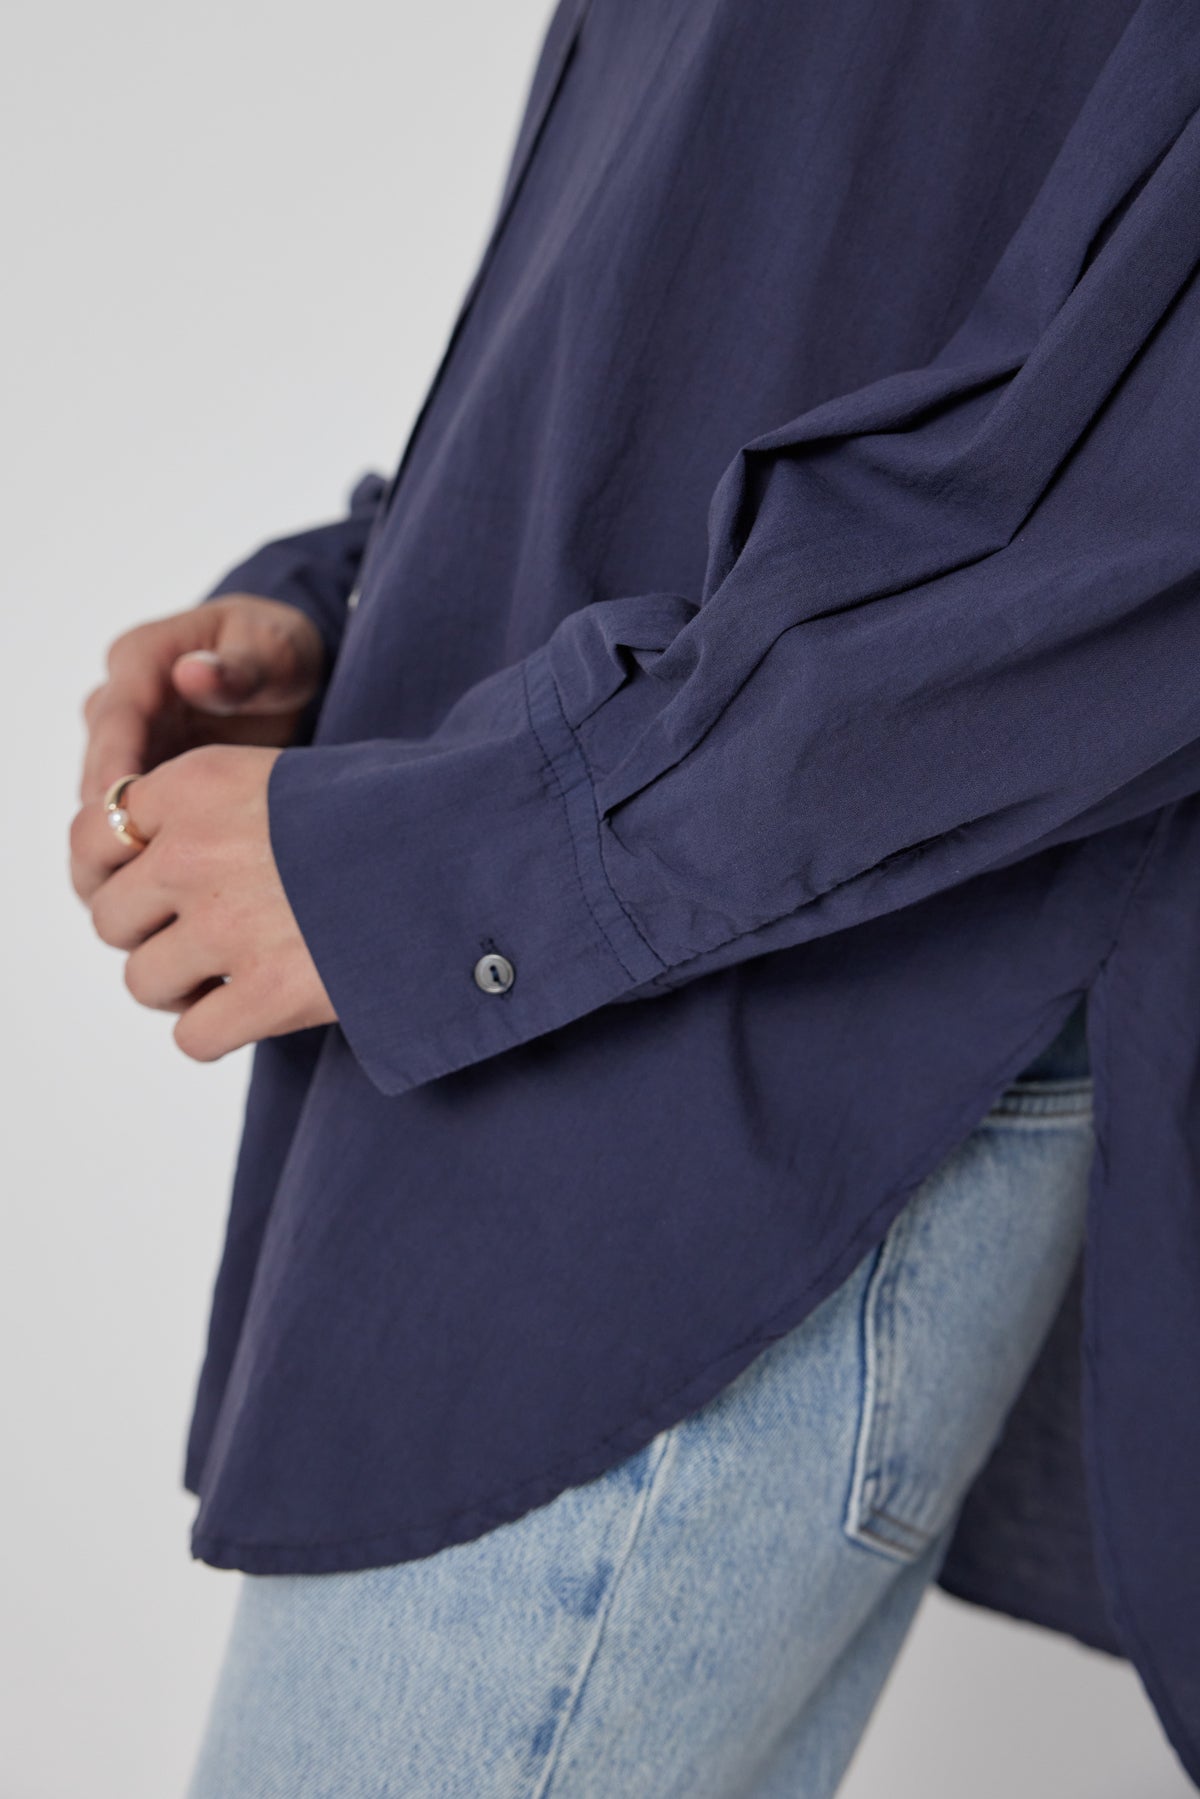 A person wearing an oversized navy blue Velvet by Jenny Graham REDONDO BUTTON-UP SHIRT and blue jeans, with a focus on the shirt's cuff and button details.-36168814723265